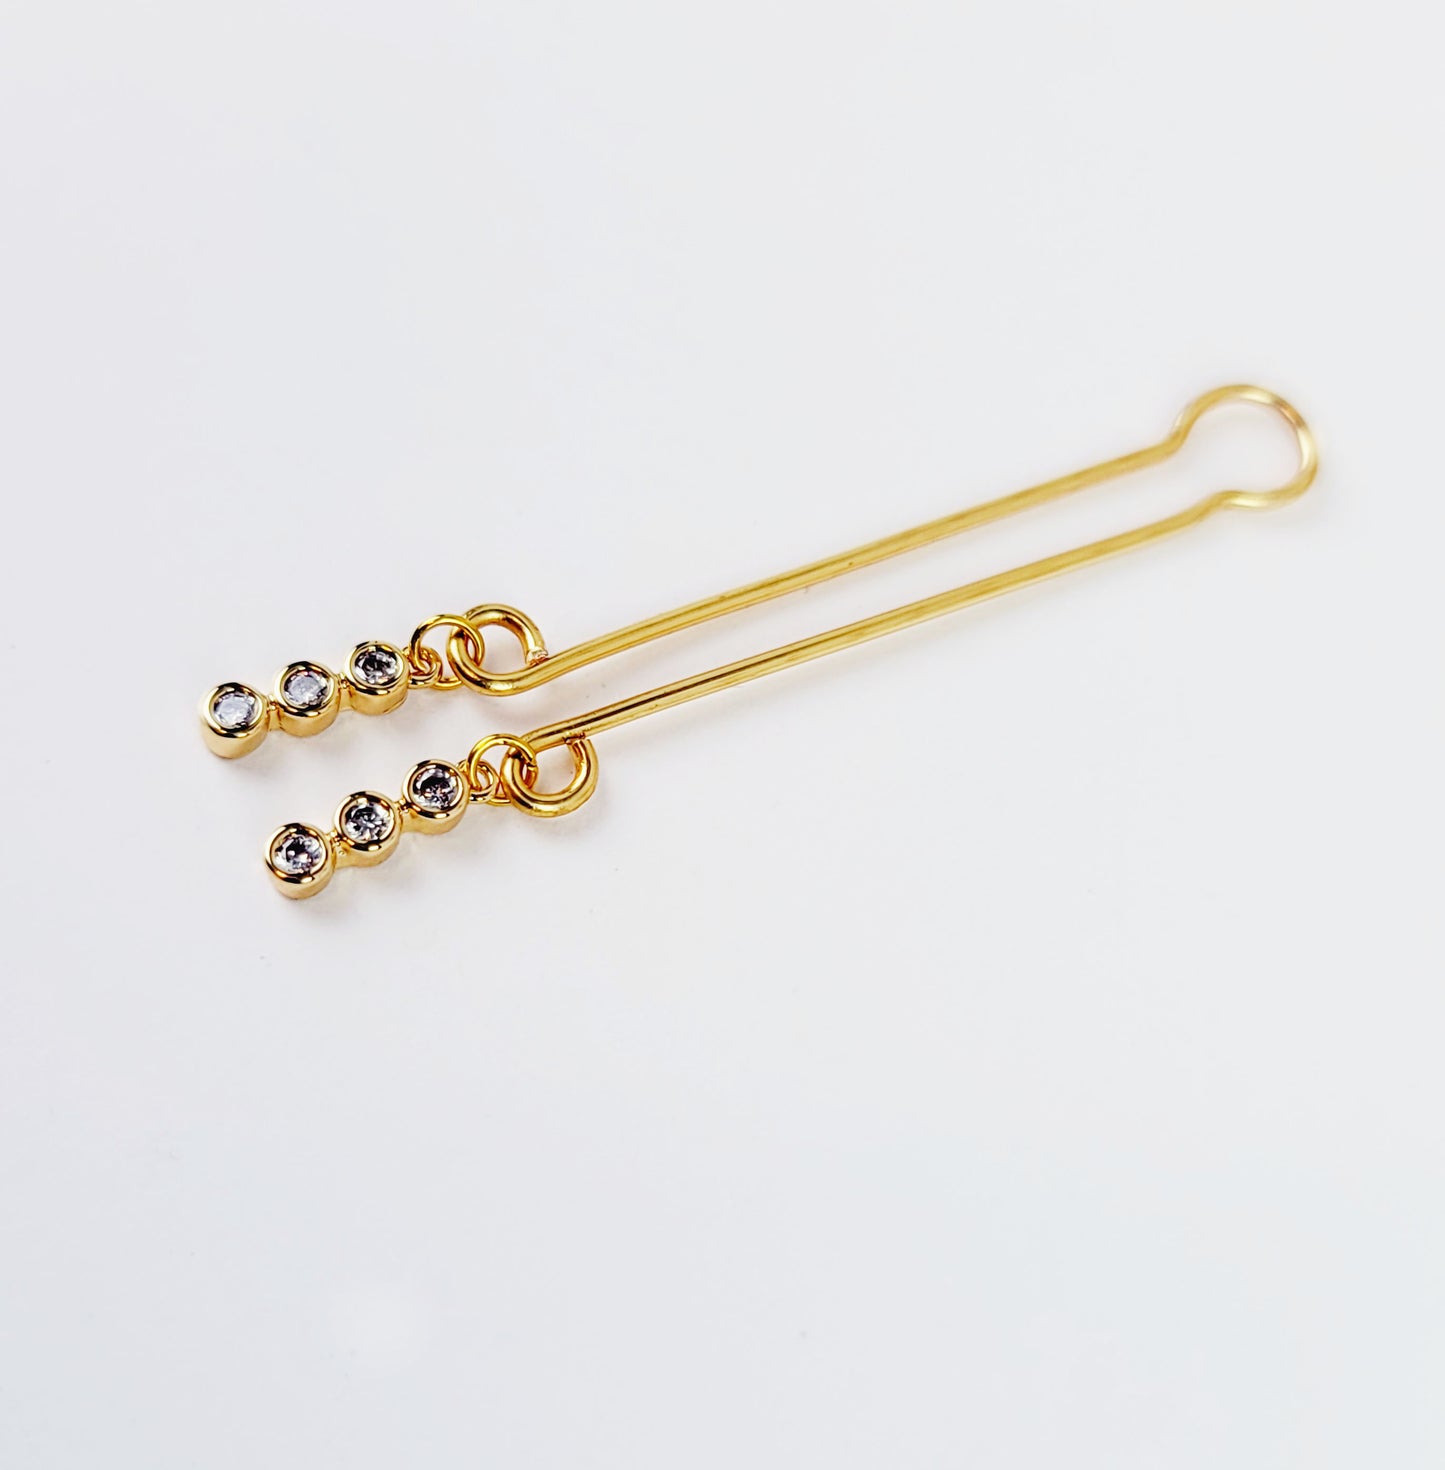 Gold Labia Clip with 18k Gold Tri Circle Gems.